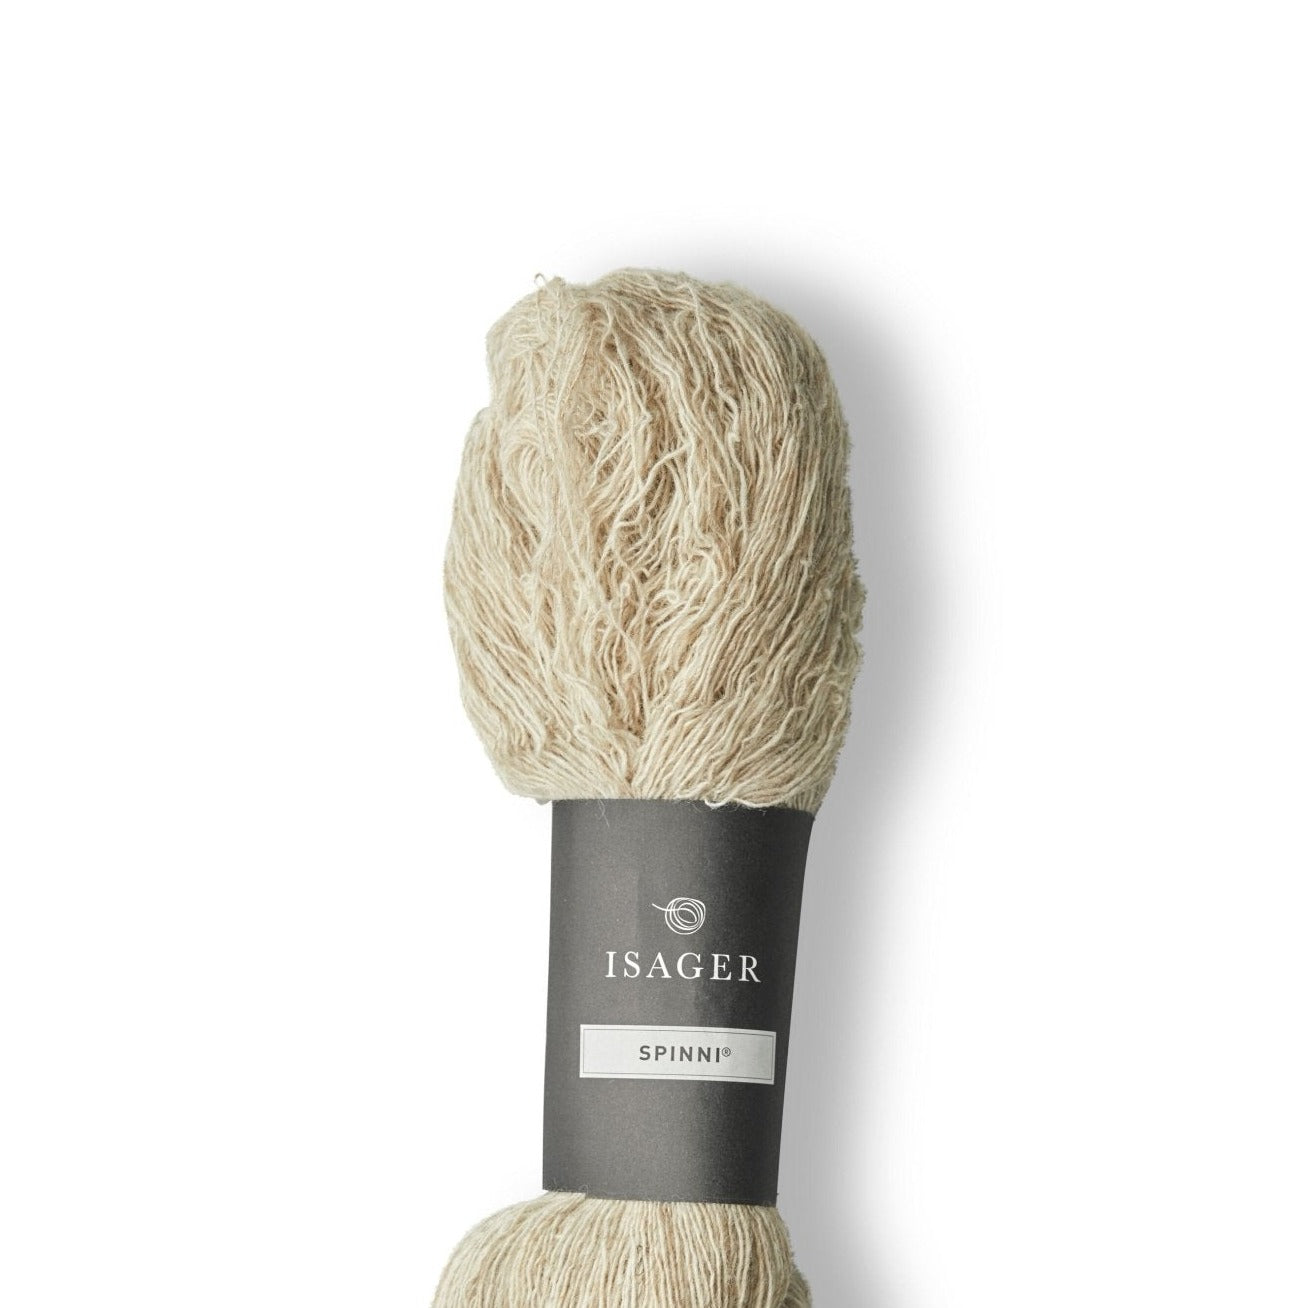 Isager Spinni - 6s - 2 Ply - Isager - The Little Yarn Store